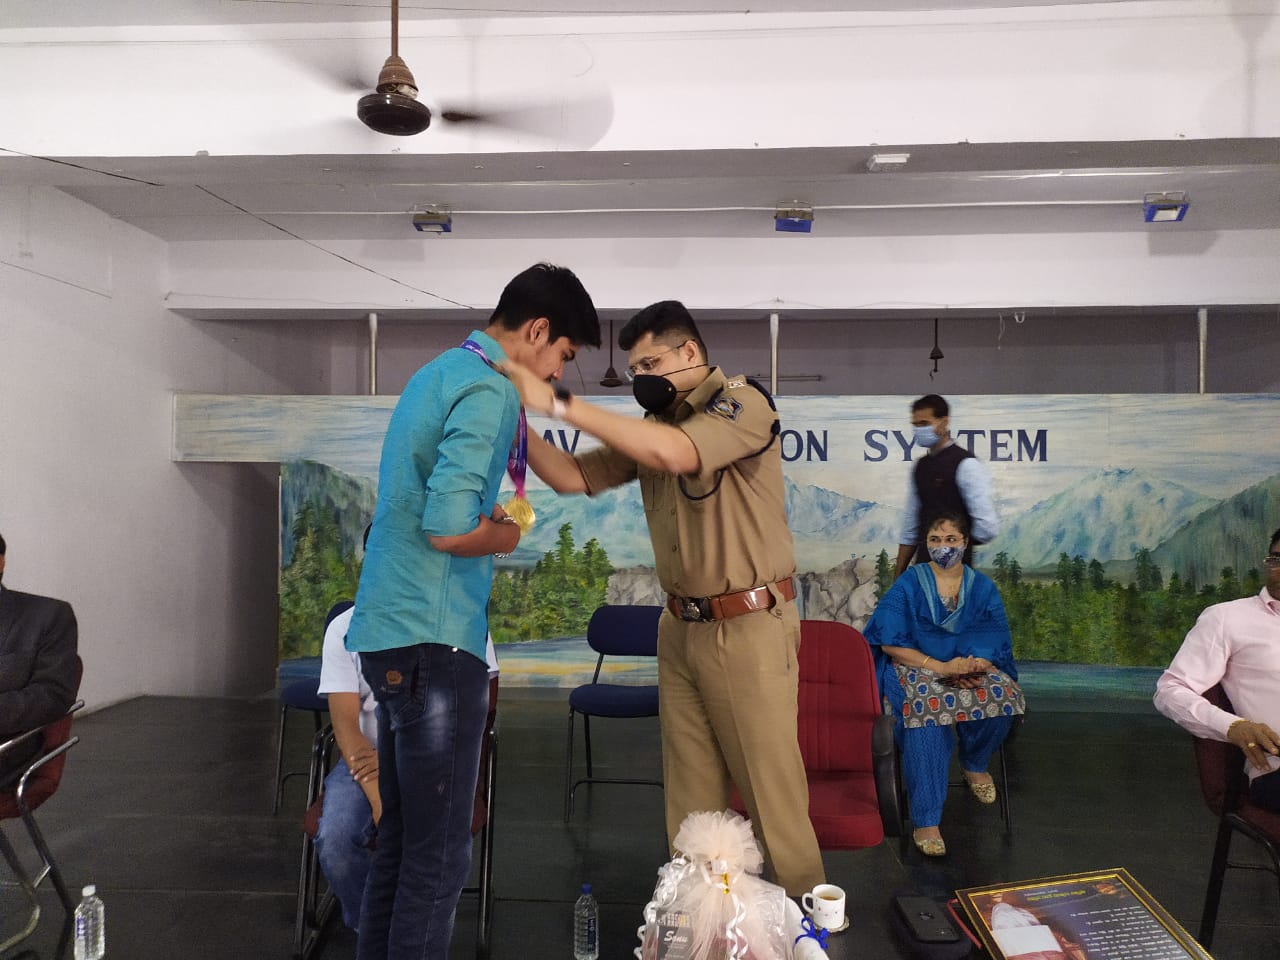 AN ENCOURAGING VISIT OF IPS OFFICER ACHAL TYAGI